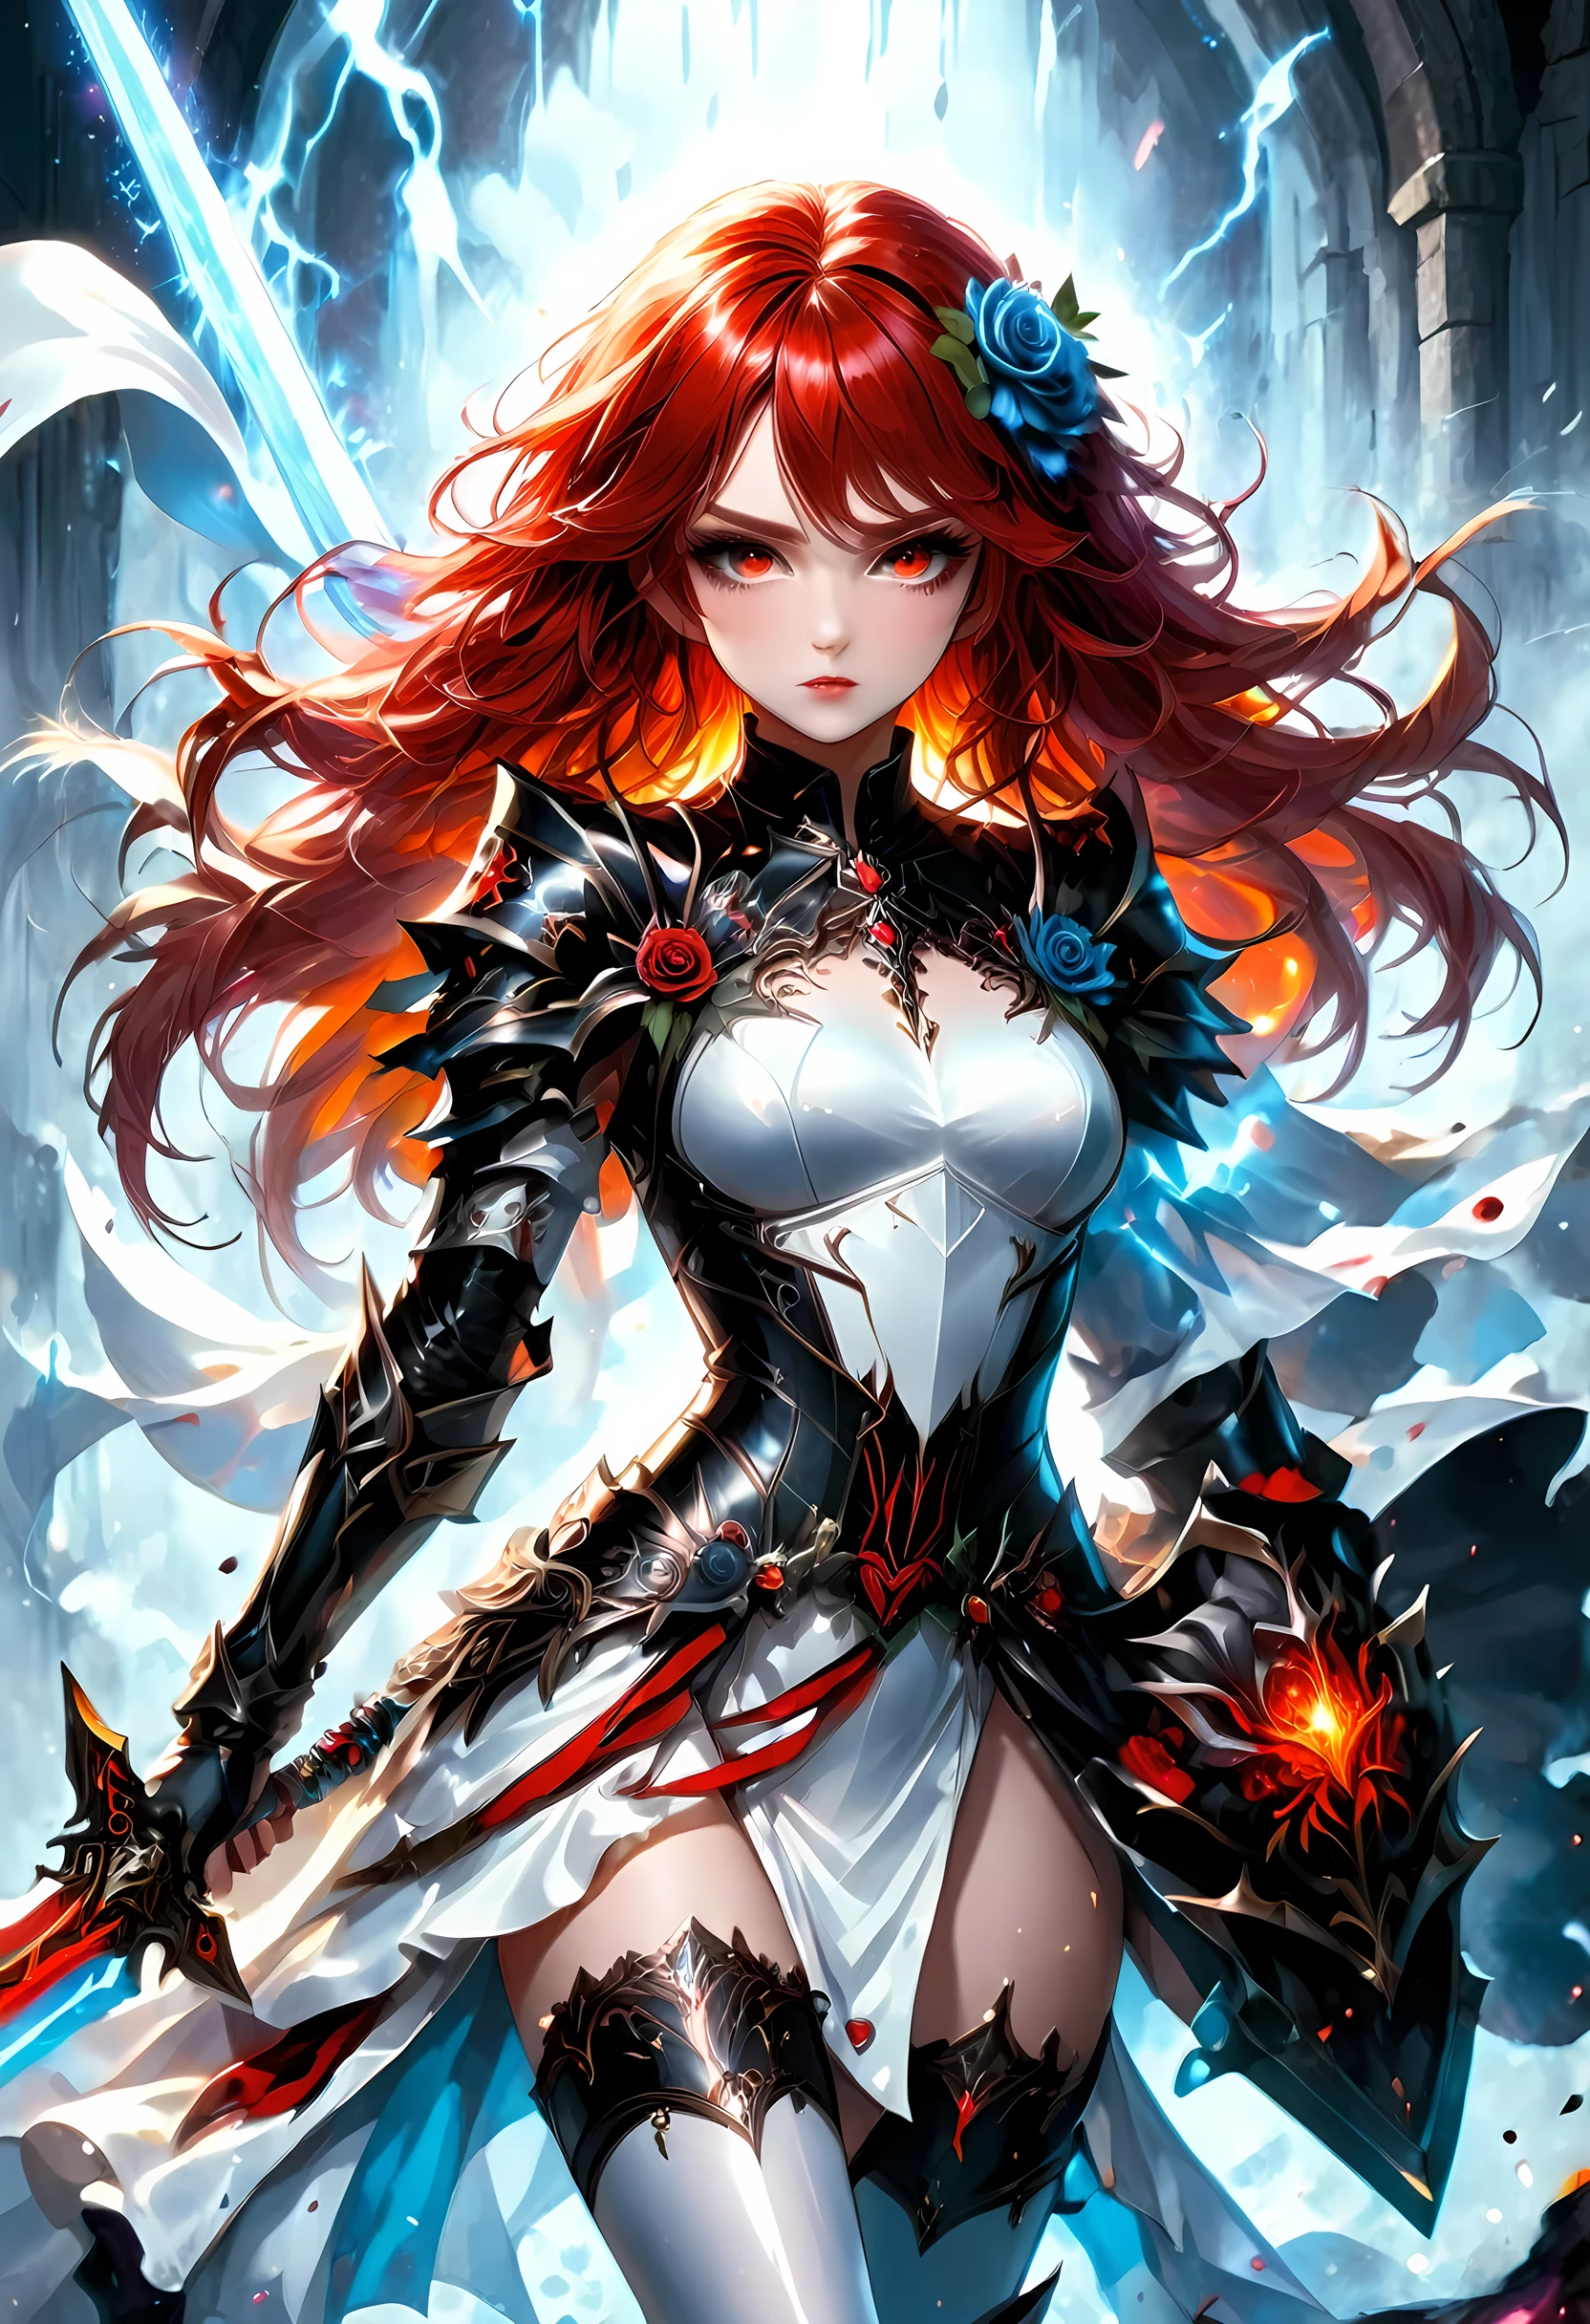 Arafed, action shot, Dark fantasy art, fantasy art, goth art, a picture of a female vampire, exquisite beauty, full body shot, dark glamour shot, pale white skin, red hair, long hair, wavy hair, dynamic eyes color eyes, glowing eyes, she wears a ((white: 1.3)) white tight suit, Armored Dress, she holds a sword in hand, (ready for battle: 1.4) , ((black roses: 1.5)) are imprinted on the suit,  high heels, dark castle, dark, black and color, Dark Art Painting Style, flower dress, dark novel, flower dress